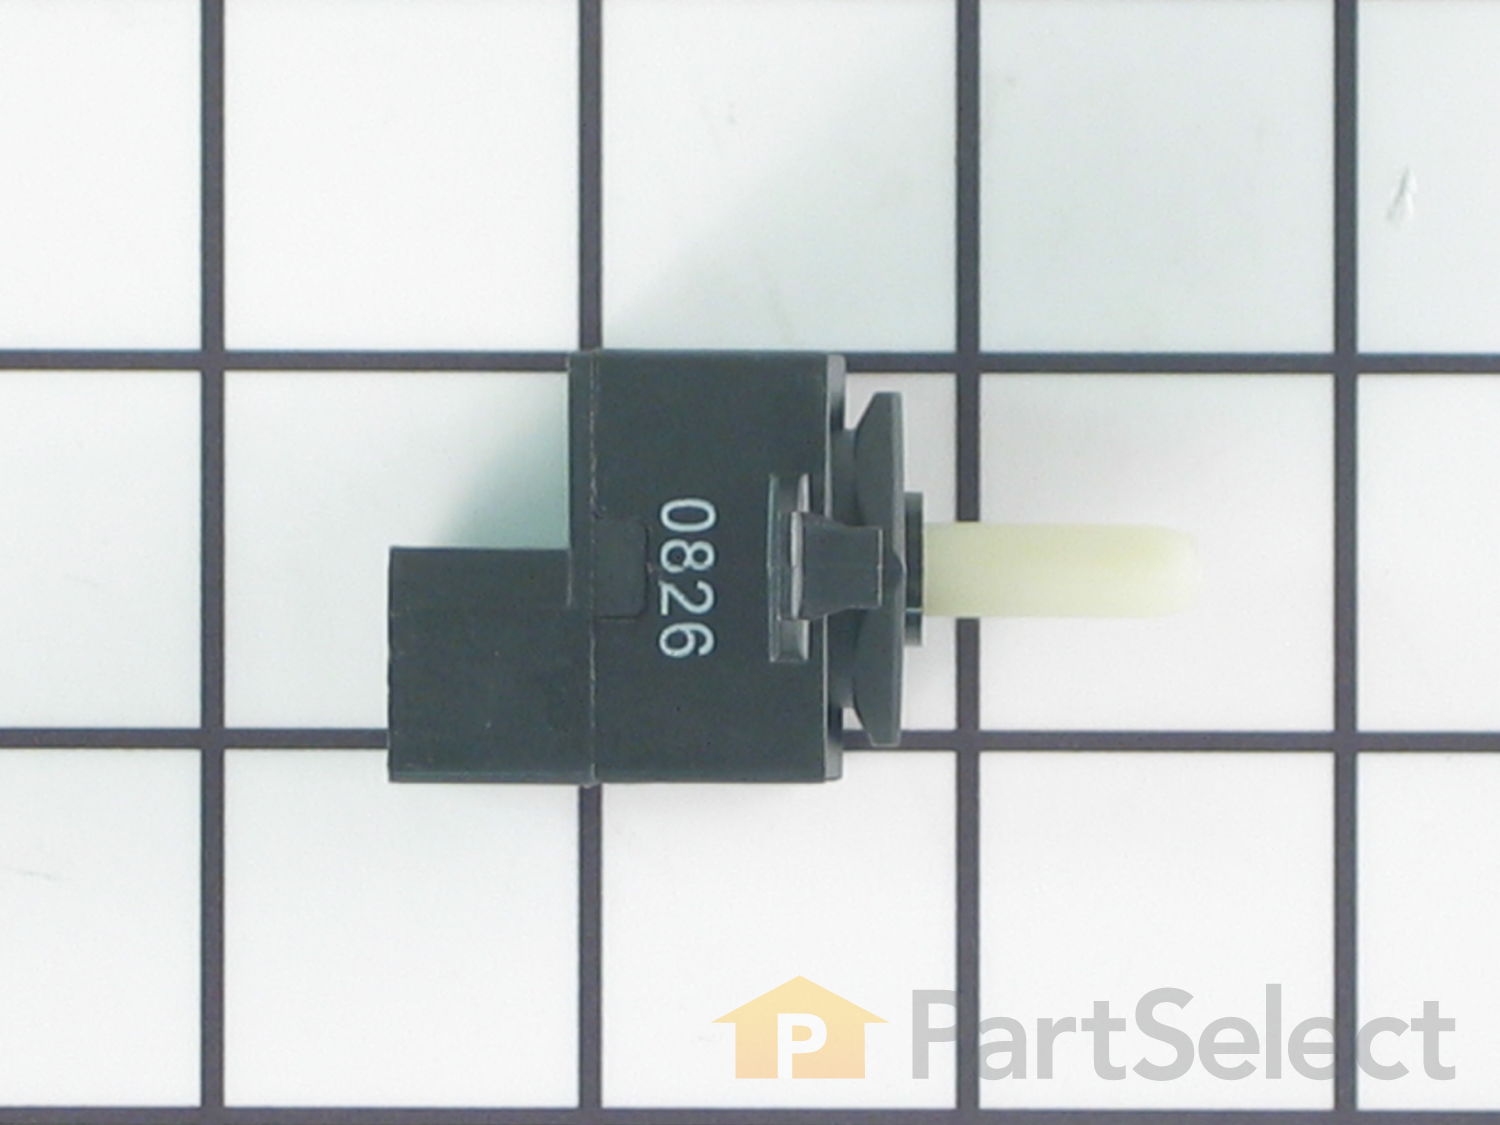 Details about   3399639 One USED Whirlpool Dryer Selector Switch Tested Good Free Shipping